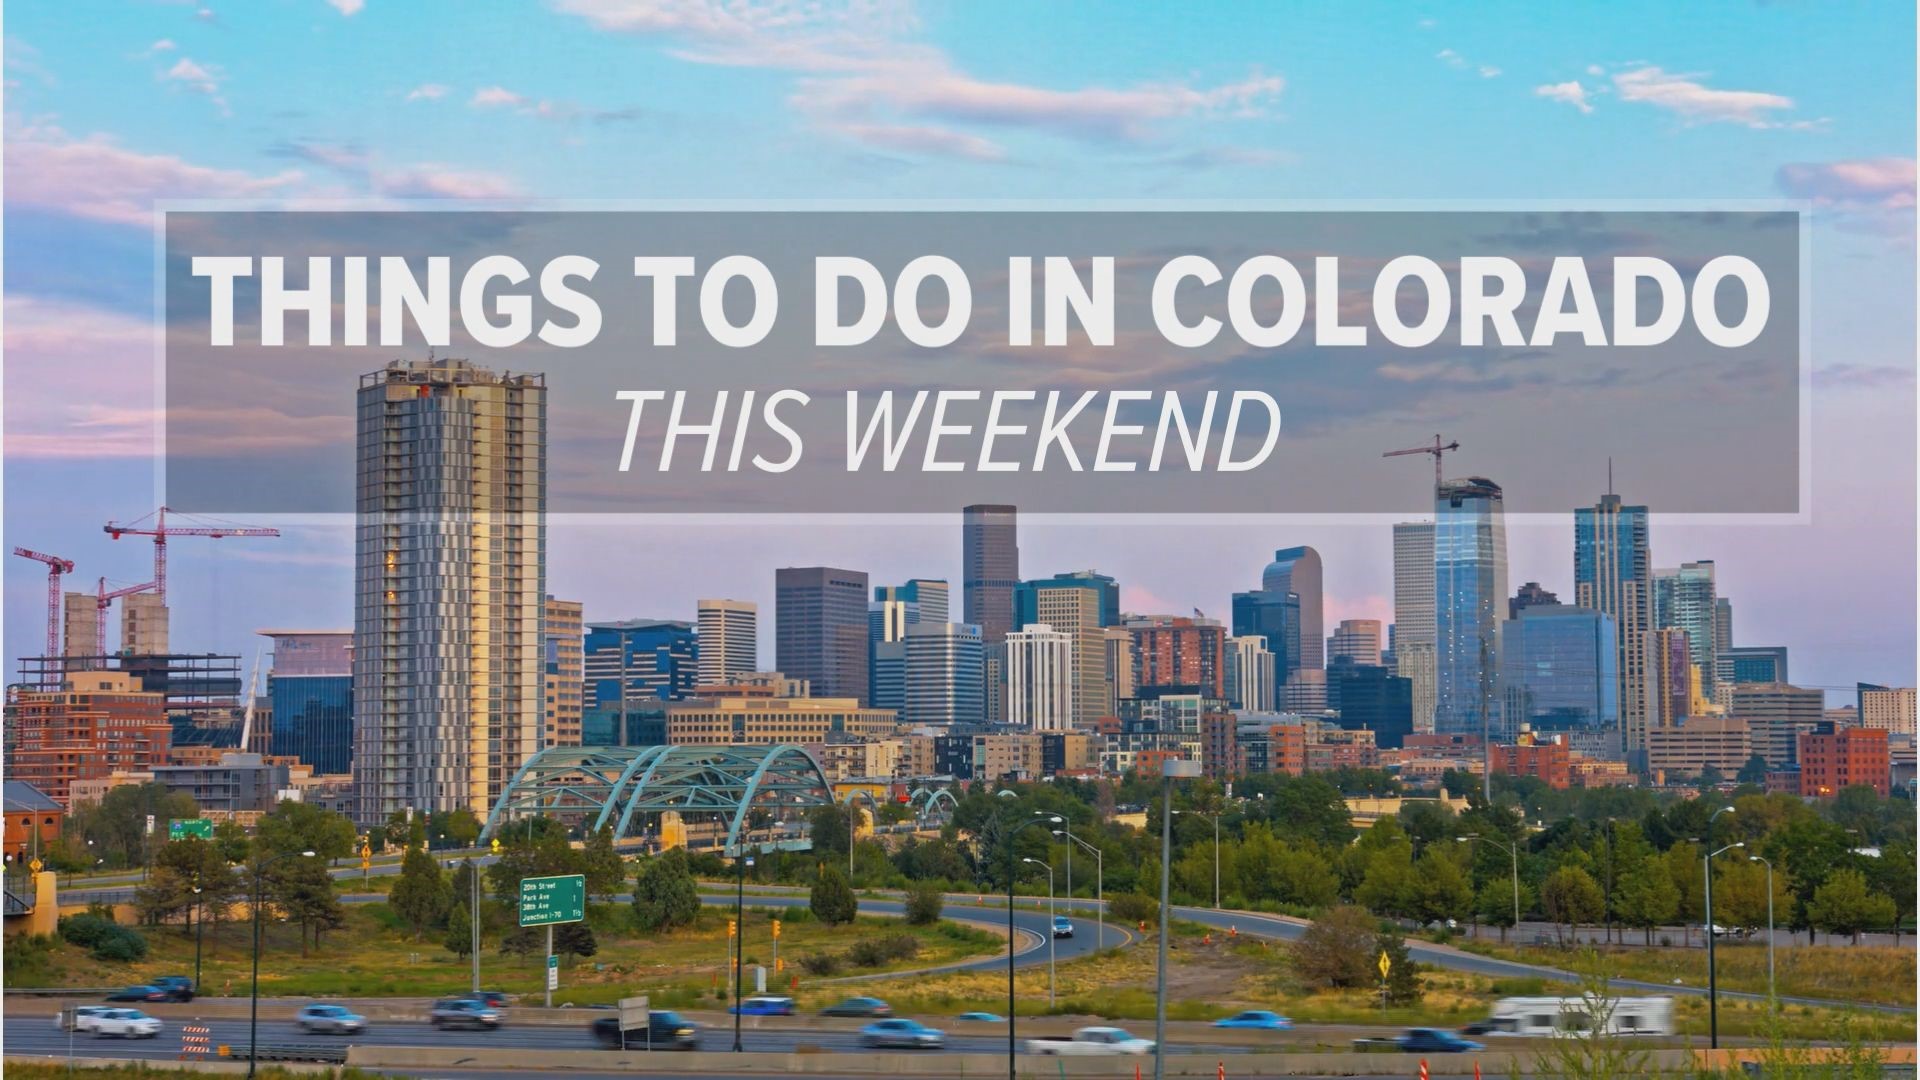 From kite festivals and button shows to expos and polar plunges, there's lots to do, see and explore in Denver and Colorado this April weekend.